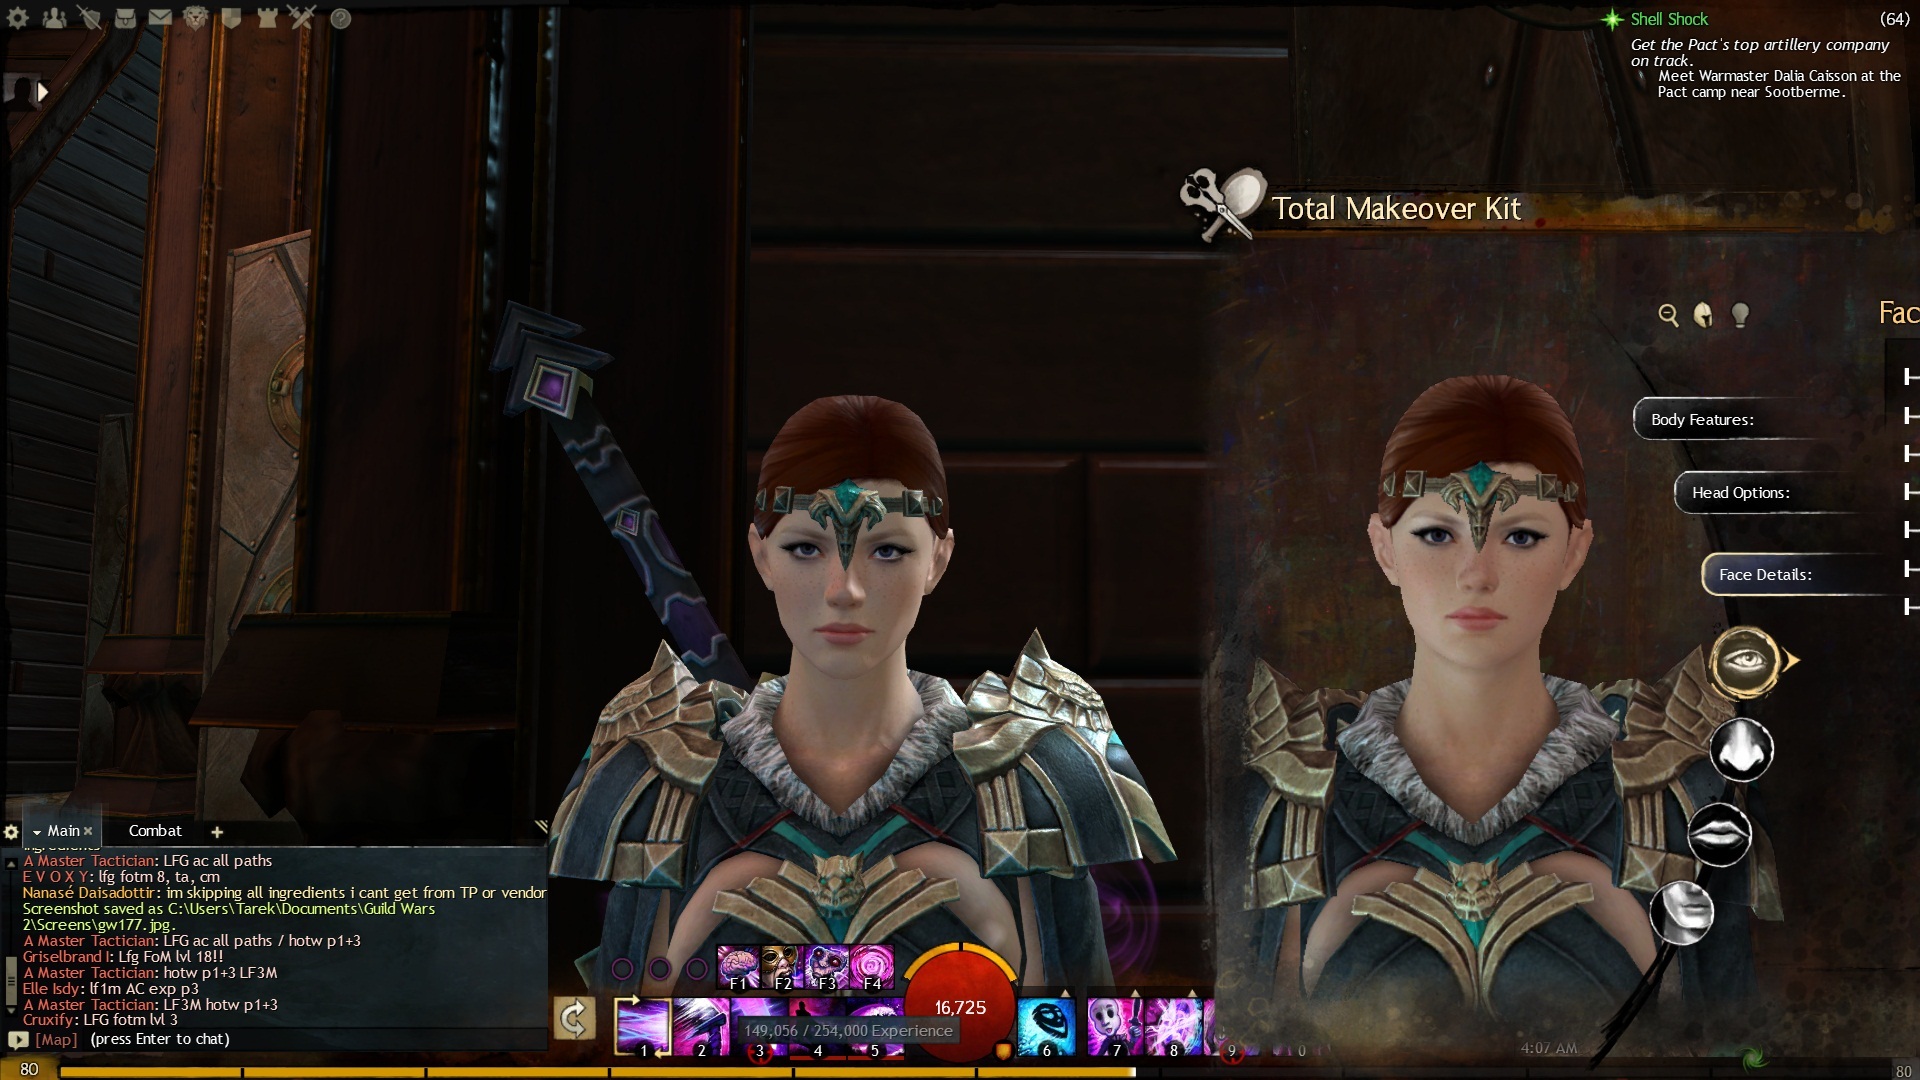 Which character should I use a Makeover Kit on? : r/Guildwars2